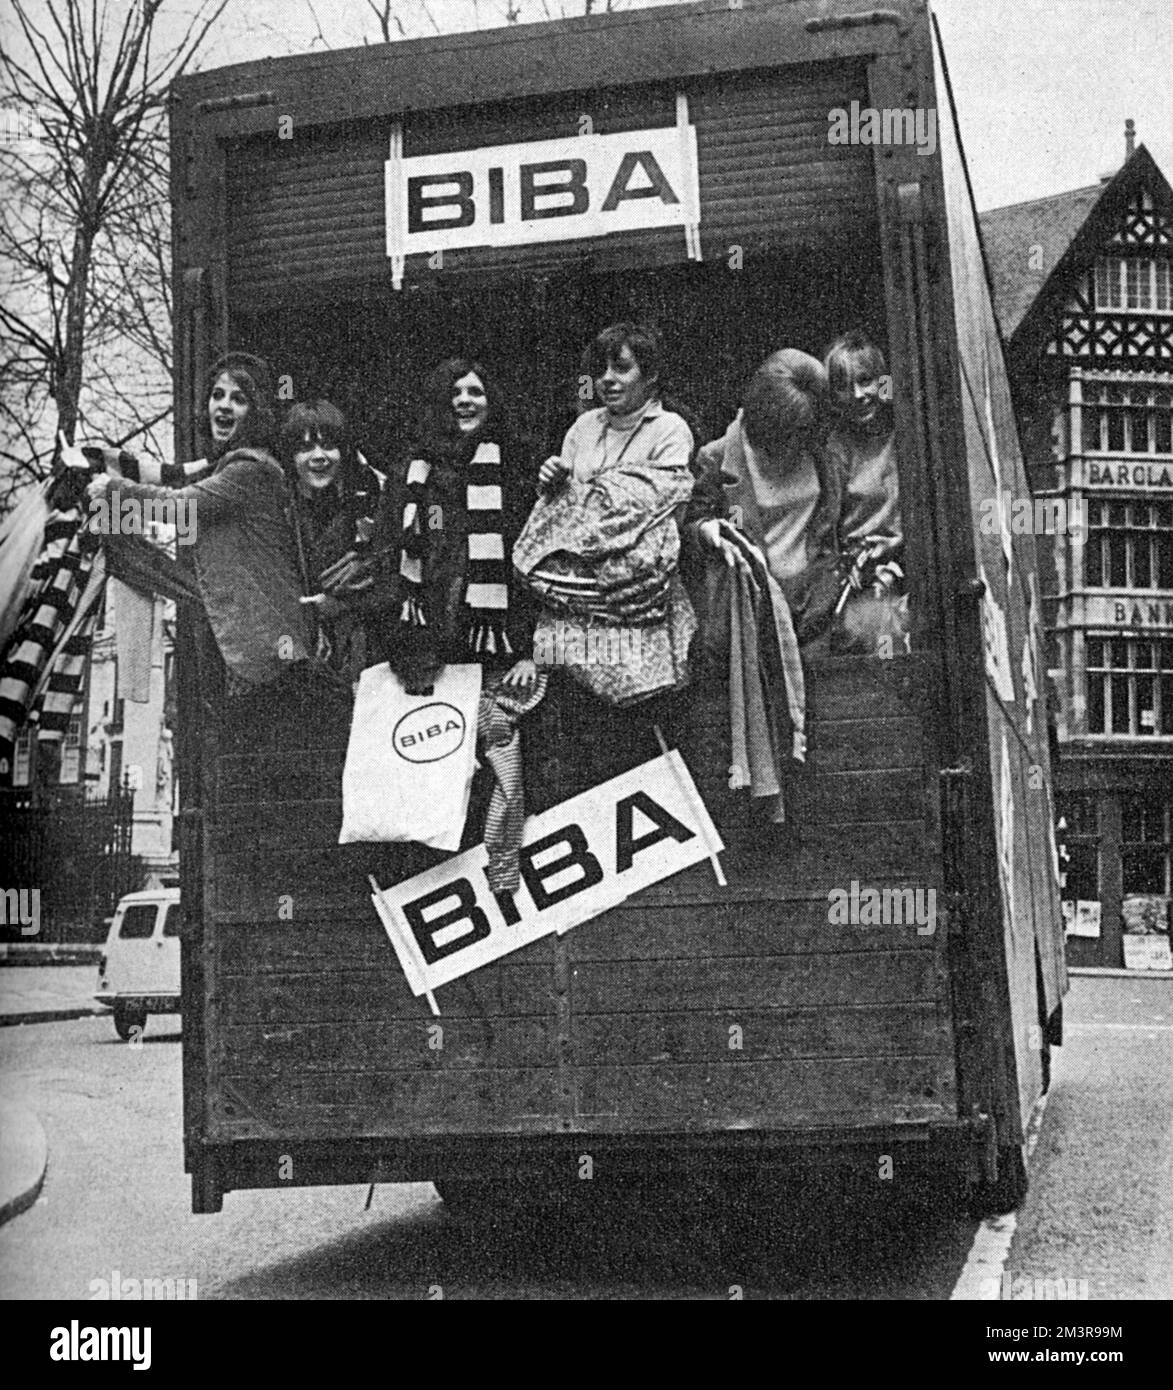 A highly publicised moving day for the Biba boutique of Barbara Hulanicki as around 60 models and well-known sixties personalities help to move the shop from its original Abingdon Road location to larger premises on Church Street.  Girls can be seen hanging out of the back of the lorry emblazoned with the Biba name.  Nicky Poulet is seen third from right.        Date: 1966 Stock Photo